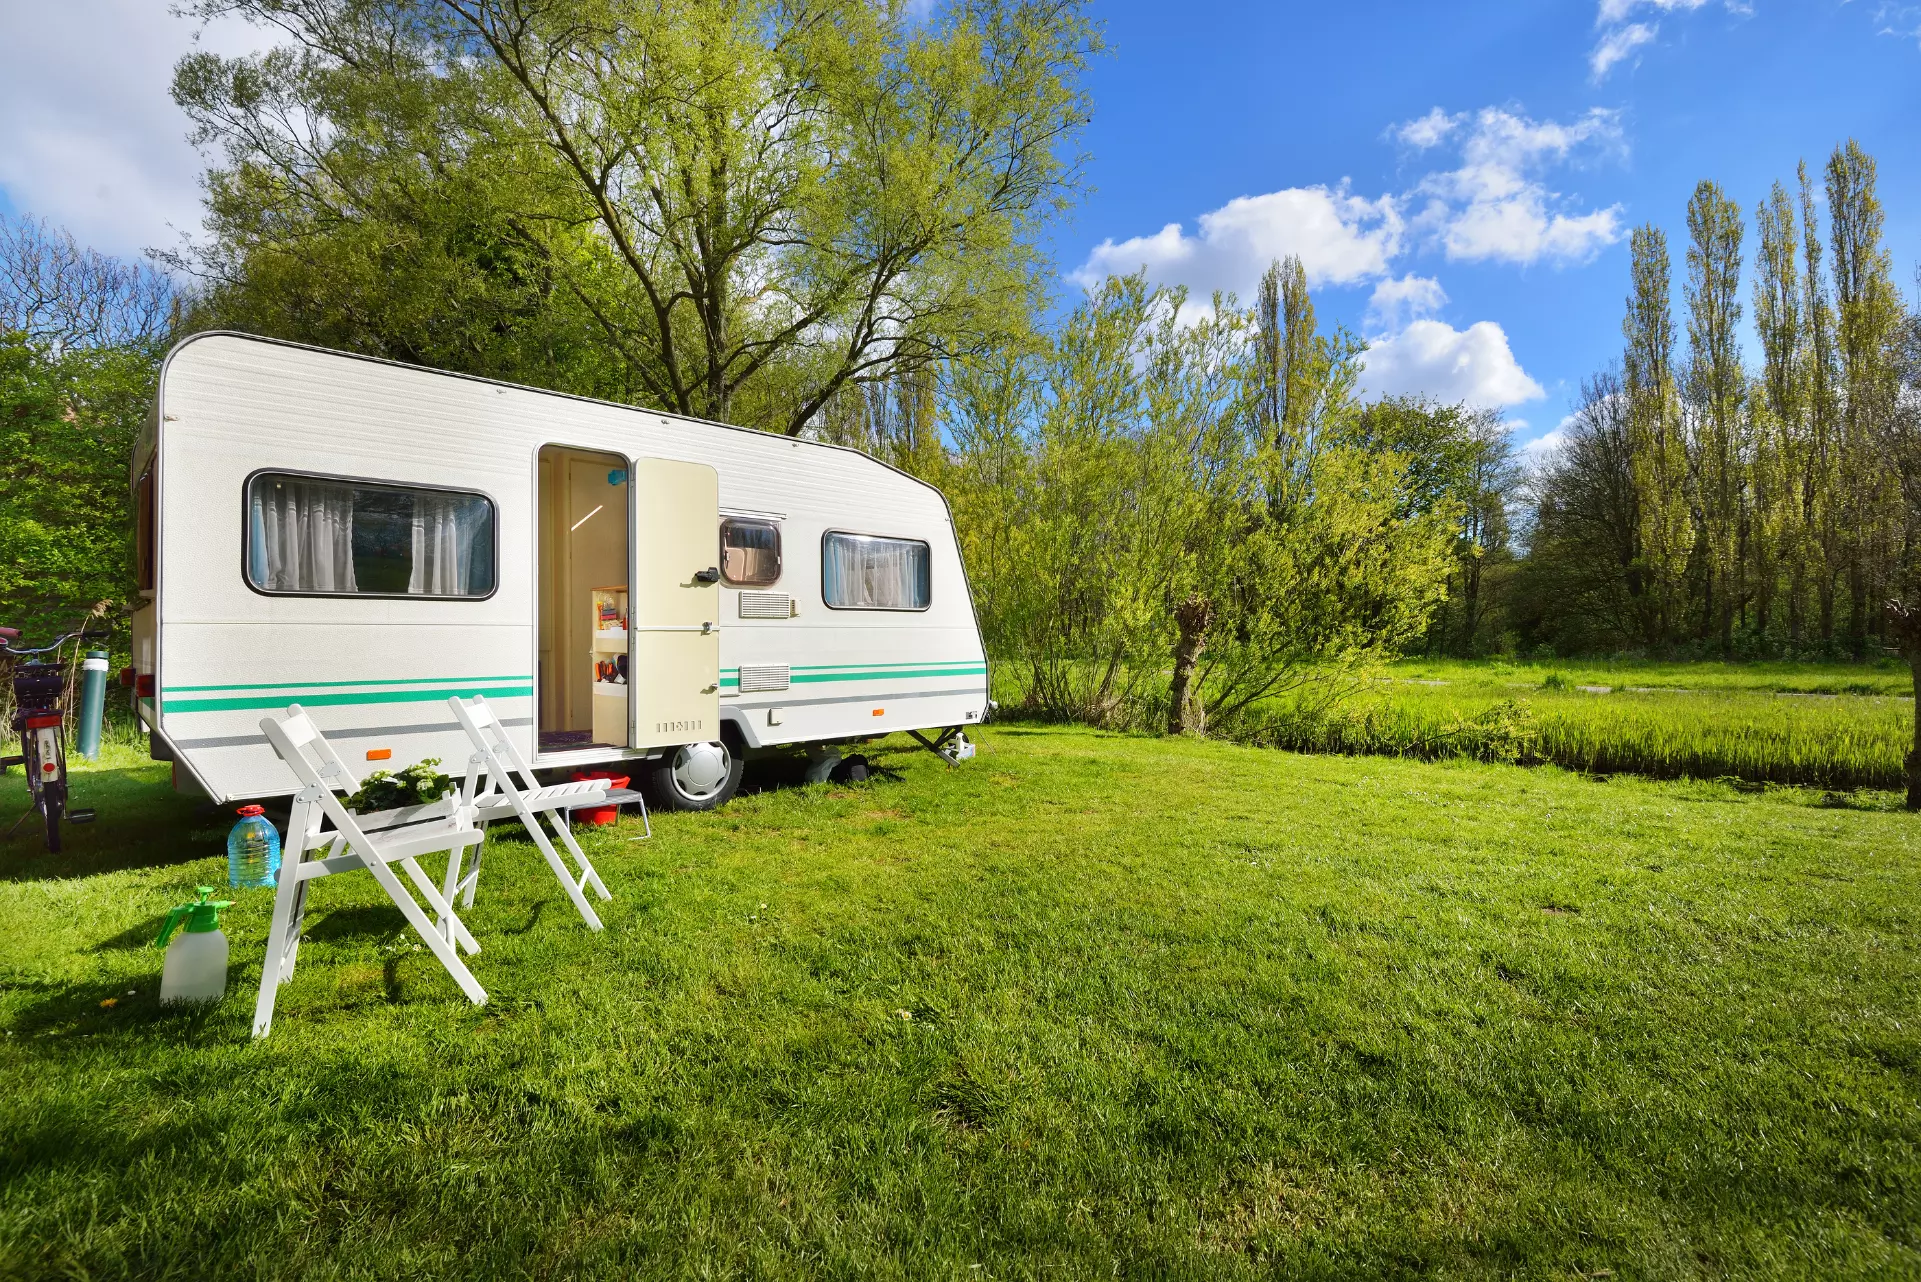 Caravans: Uses of Car Tow Bar - Lincoln and Lincolnshire